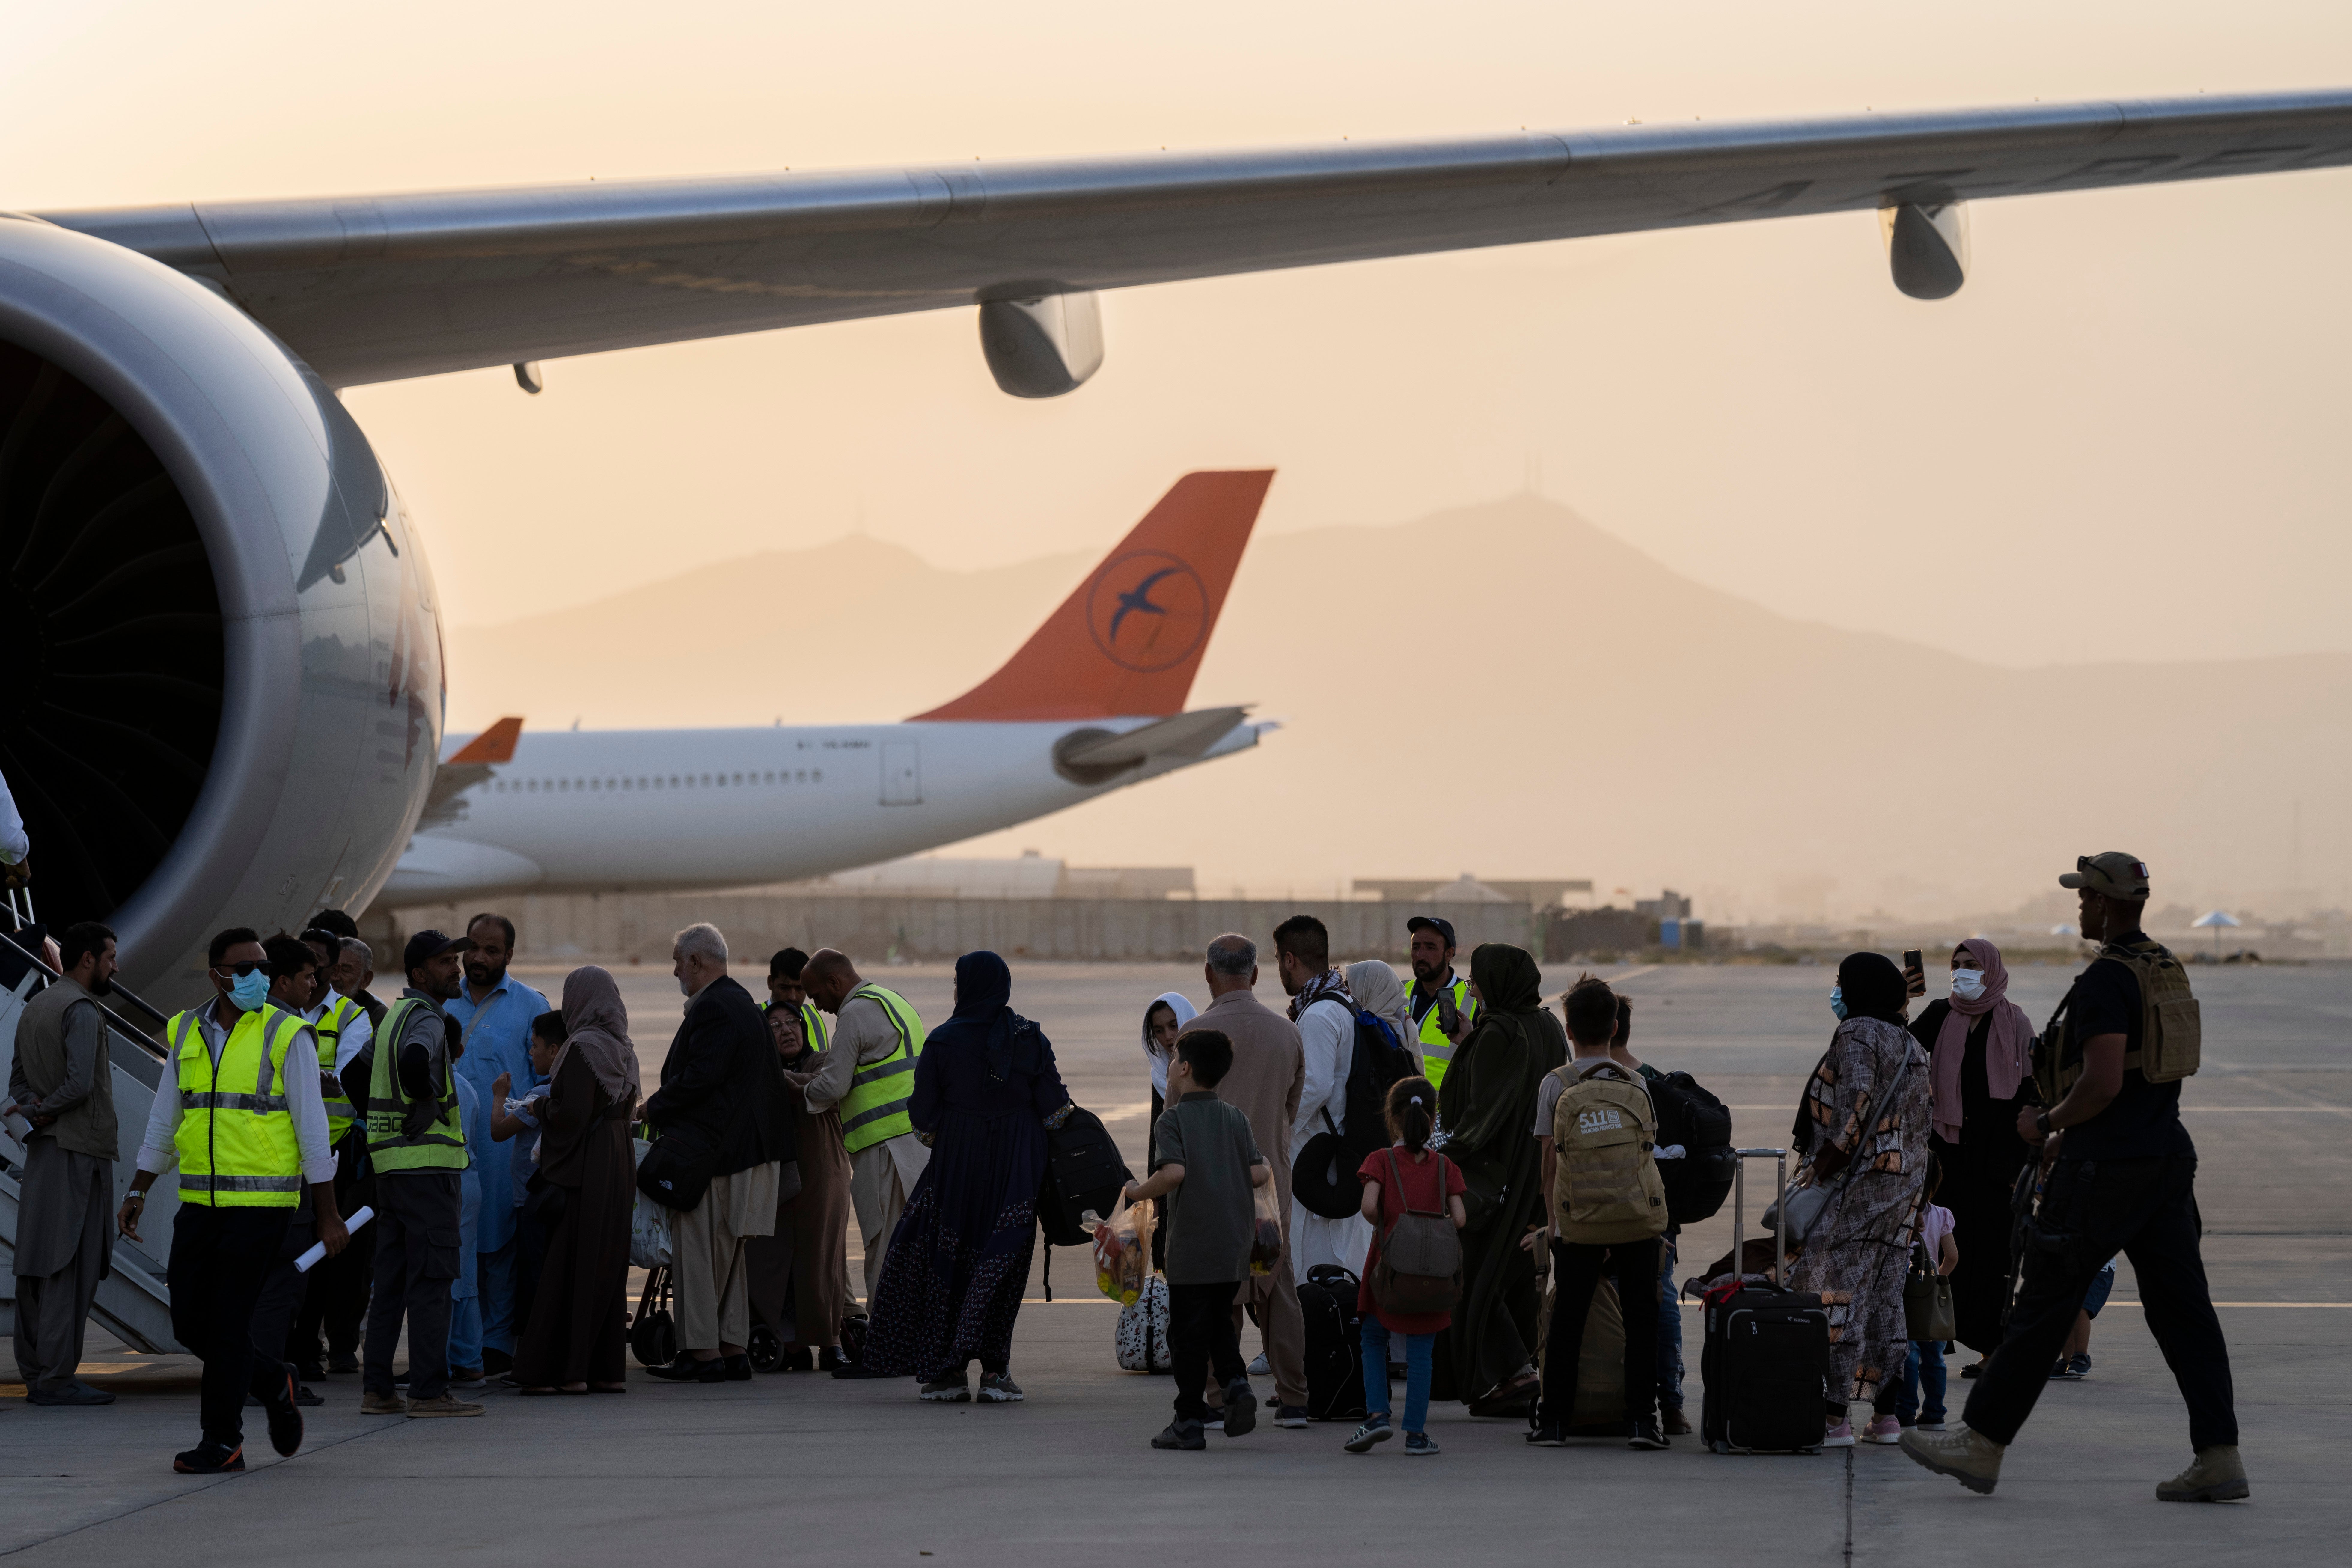 Foreigners board a Qatar Airways aircraft at the airport in Kabul, Afghanistan